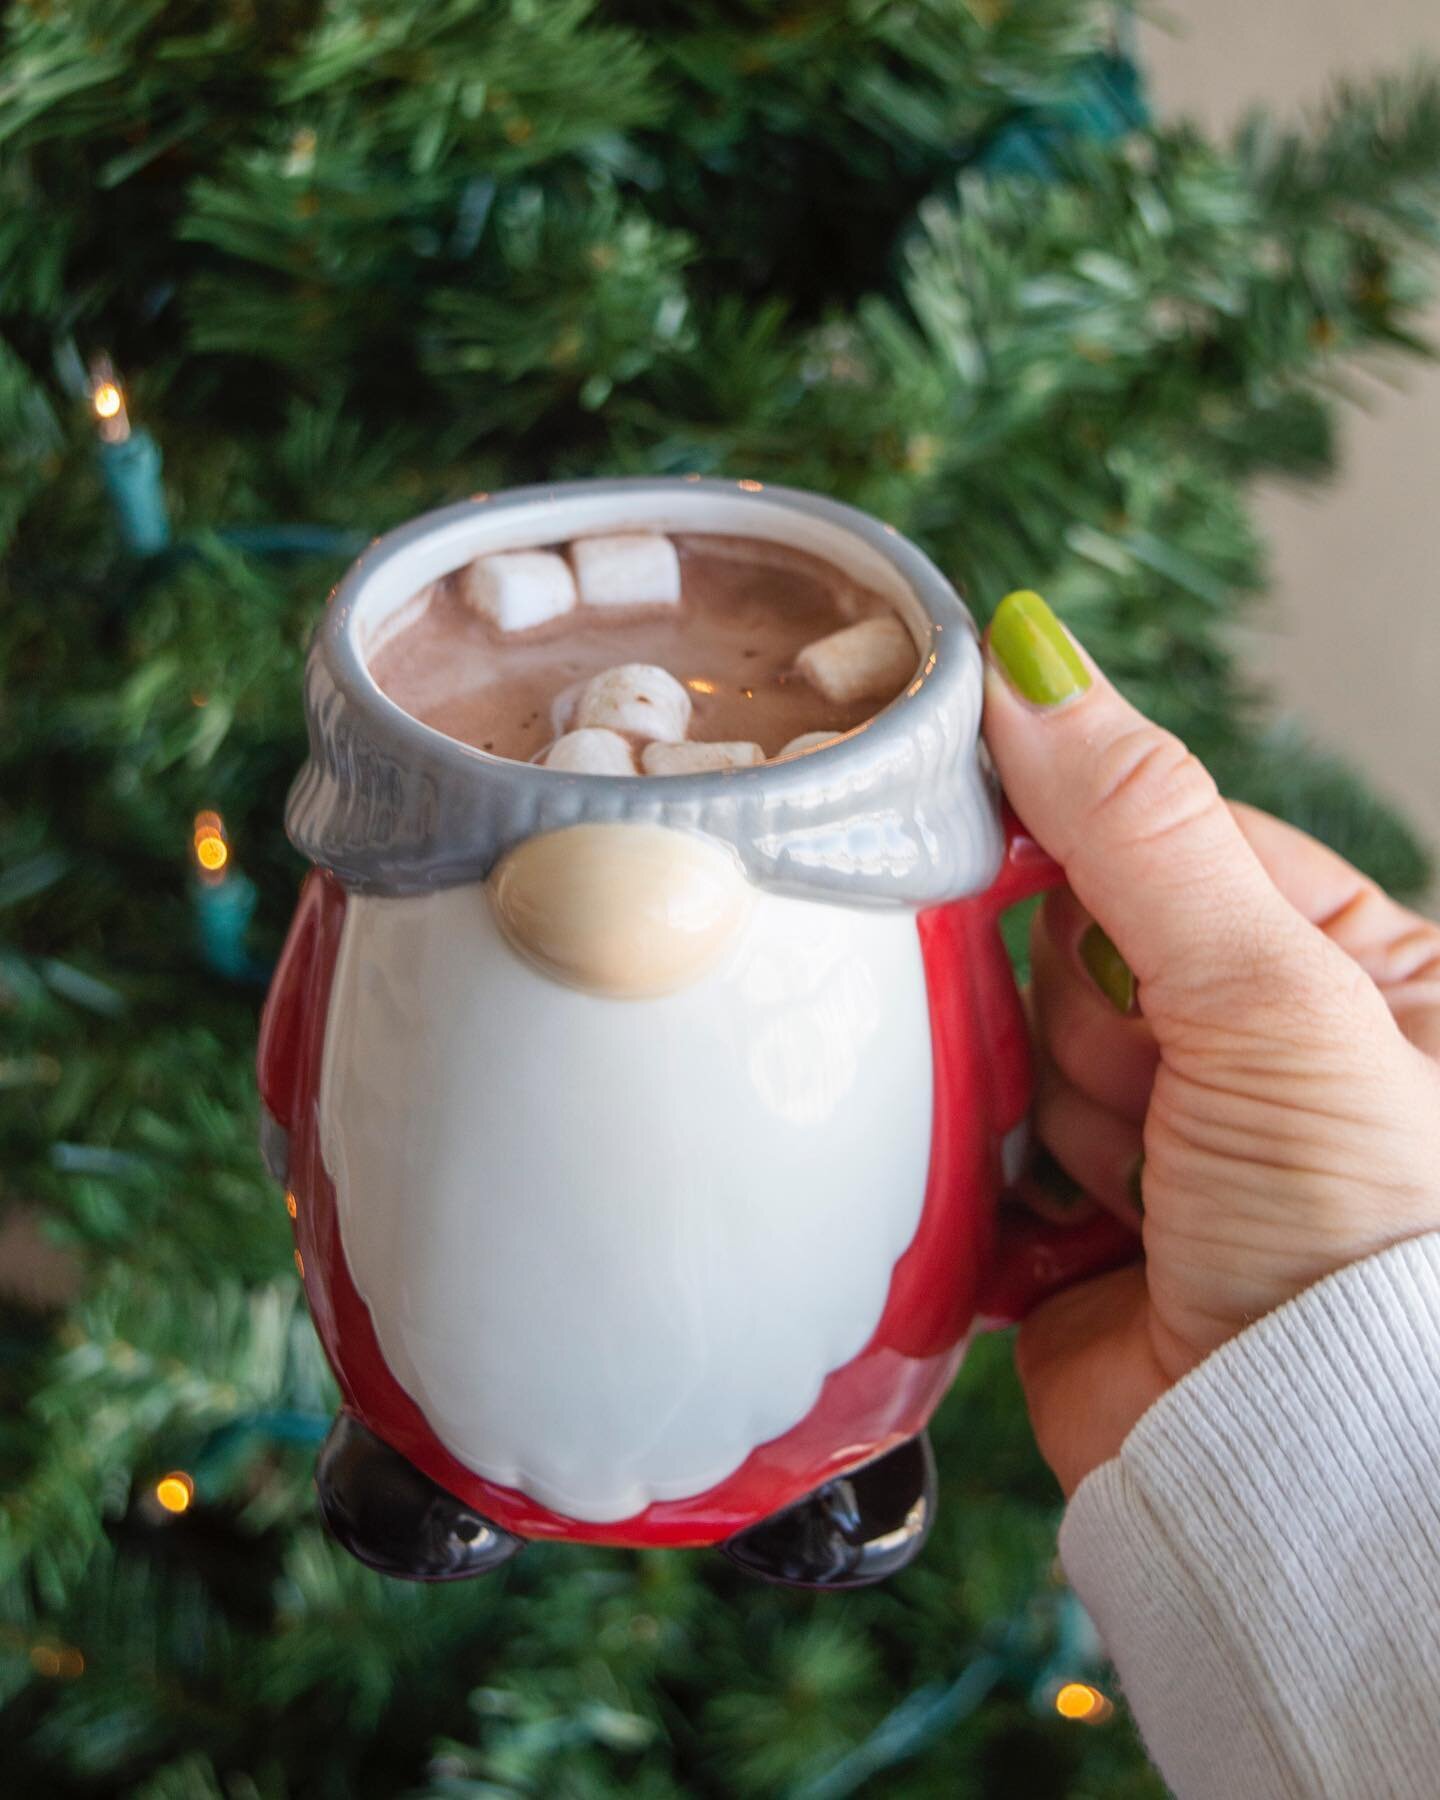 Nothing sounds better than a nice warm cup of cocoa right now! Especially in a cute gnome mug like this one! Check it out at a Big Lots or Ross near you ☕️ 

#productphotography #productdesign #productshoot #gnomemug #gnomesweetgnome #gnomelife #gnom